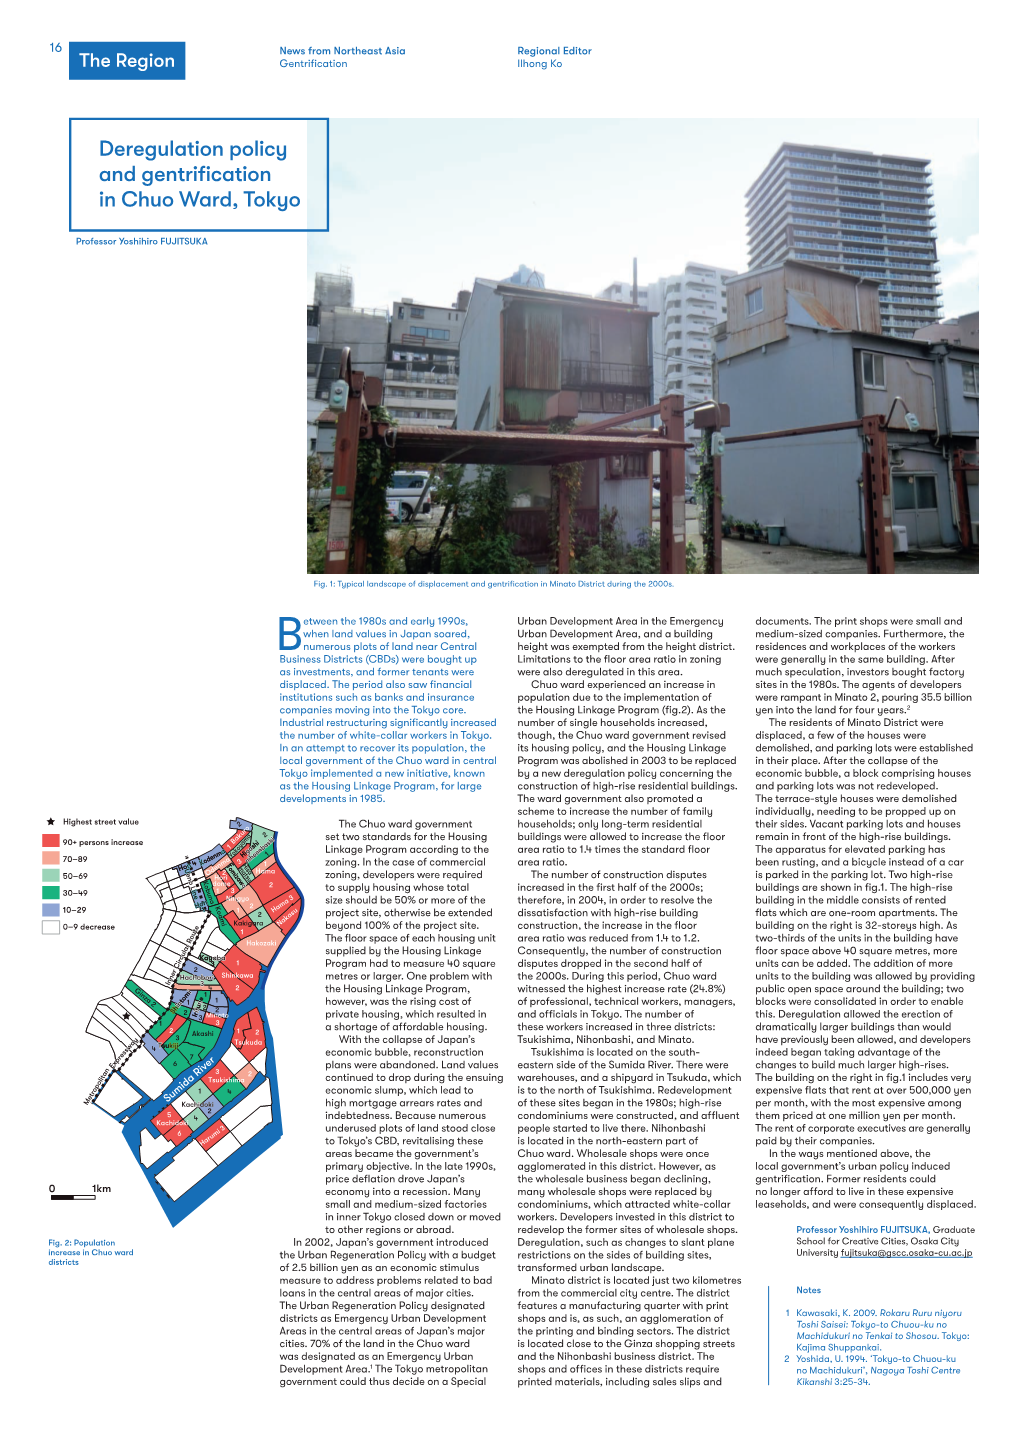 Deregulation Policy and Gentrification in Chuo Ward, Tokyo